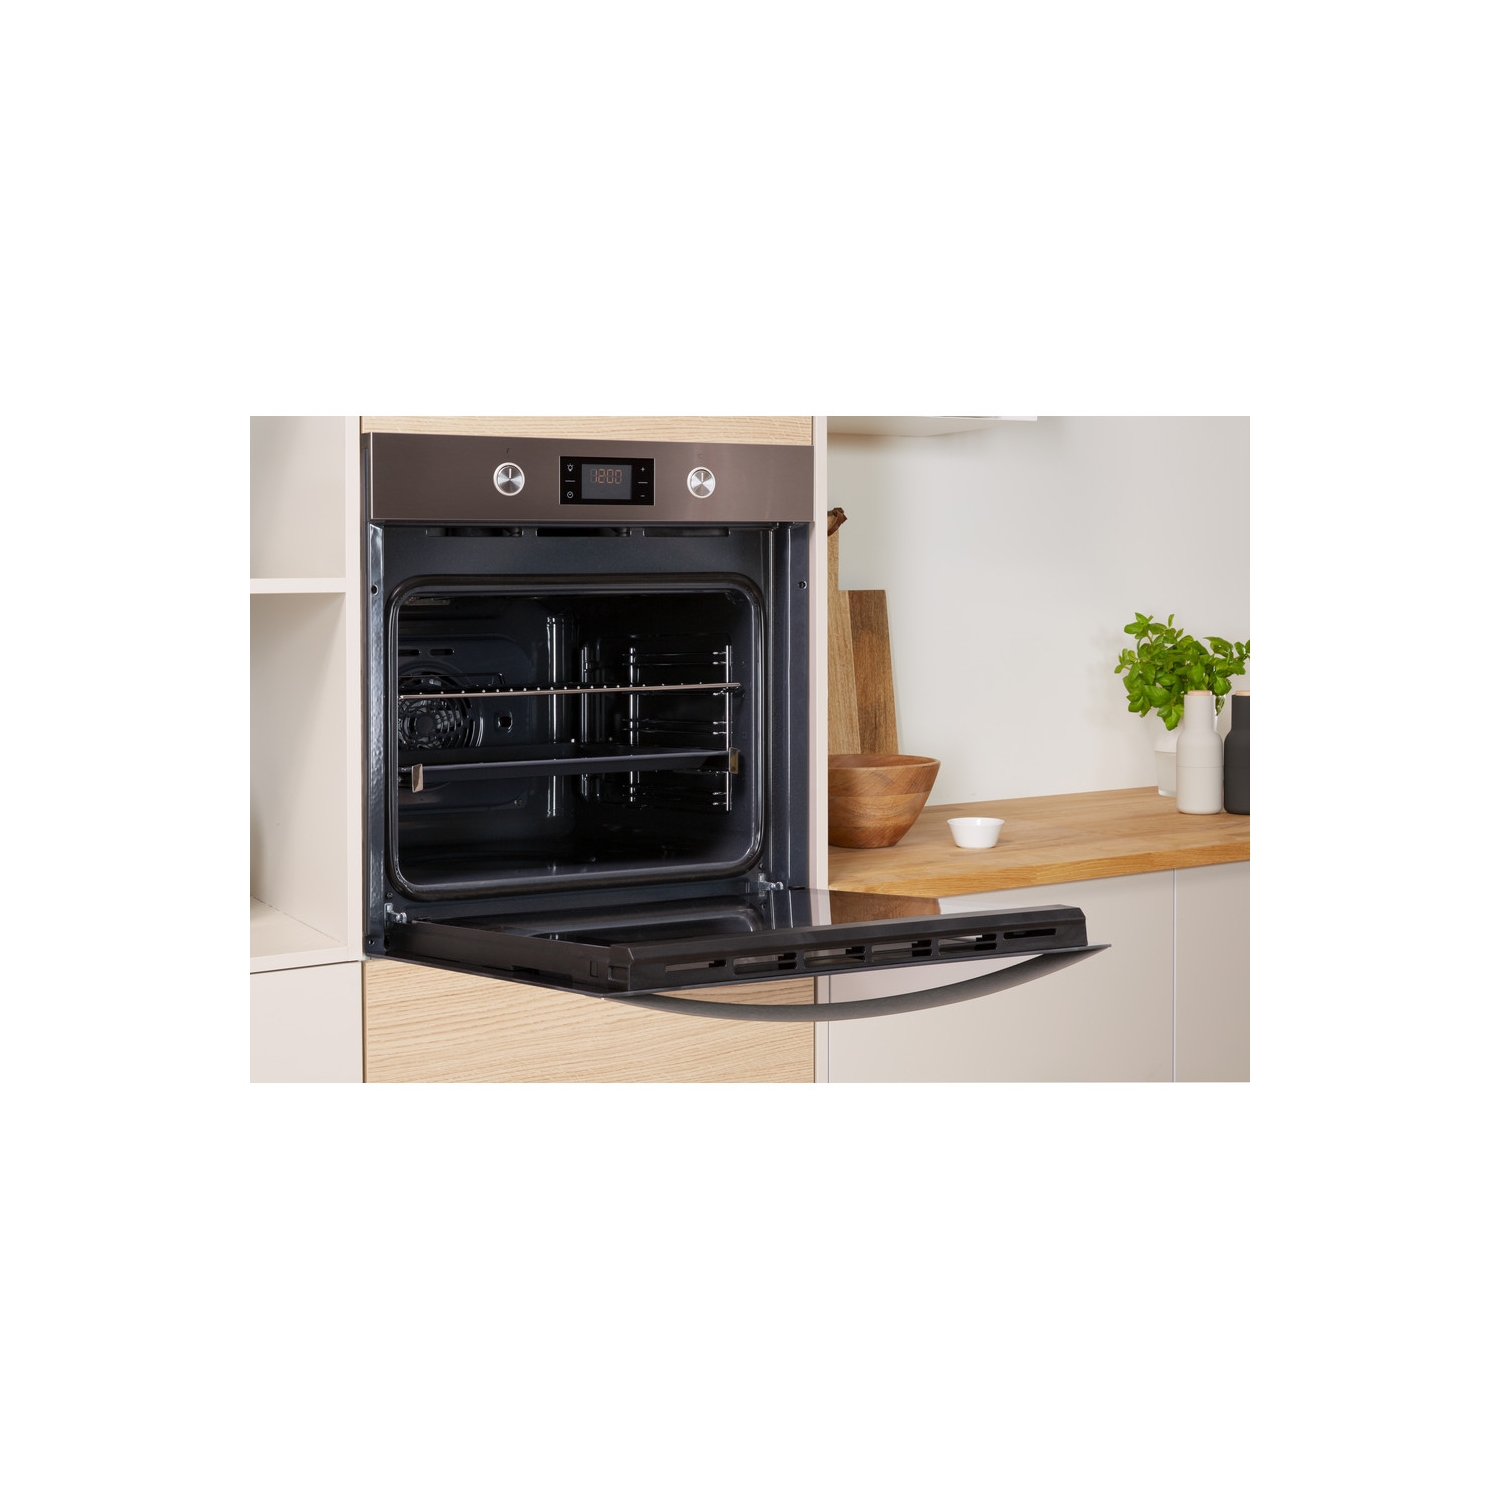 Indesit Built In Electric Single Oven - Stainless Steel - A+ Rated - 11